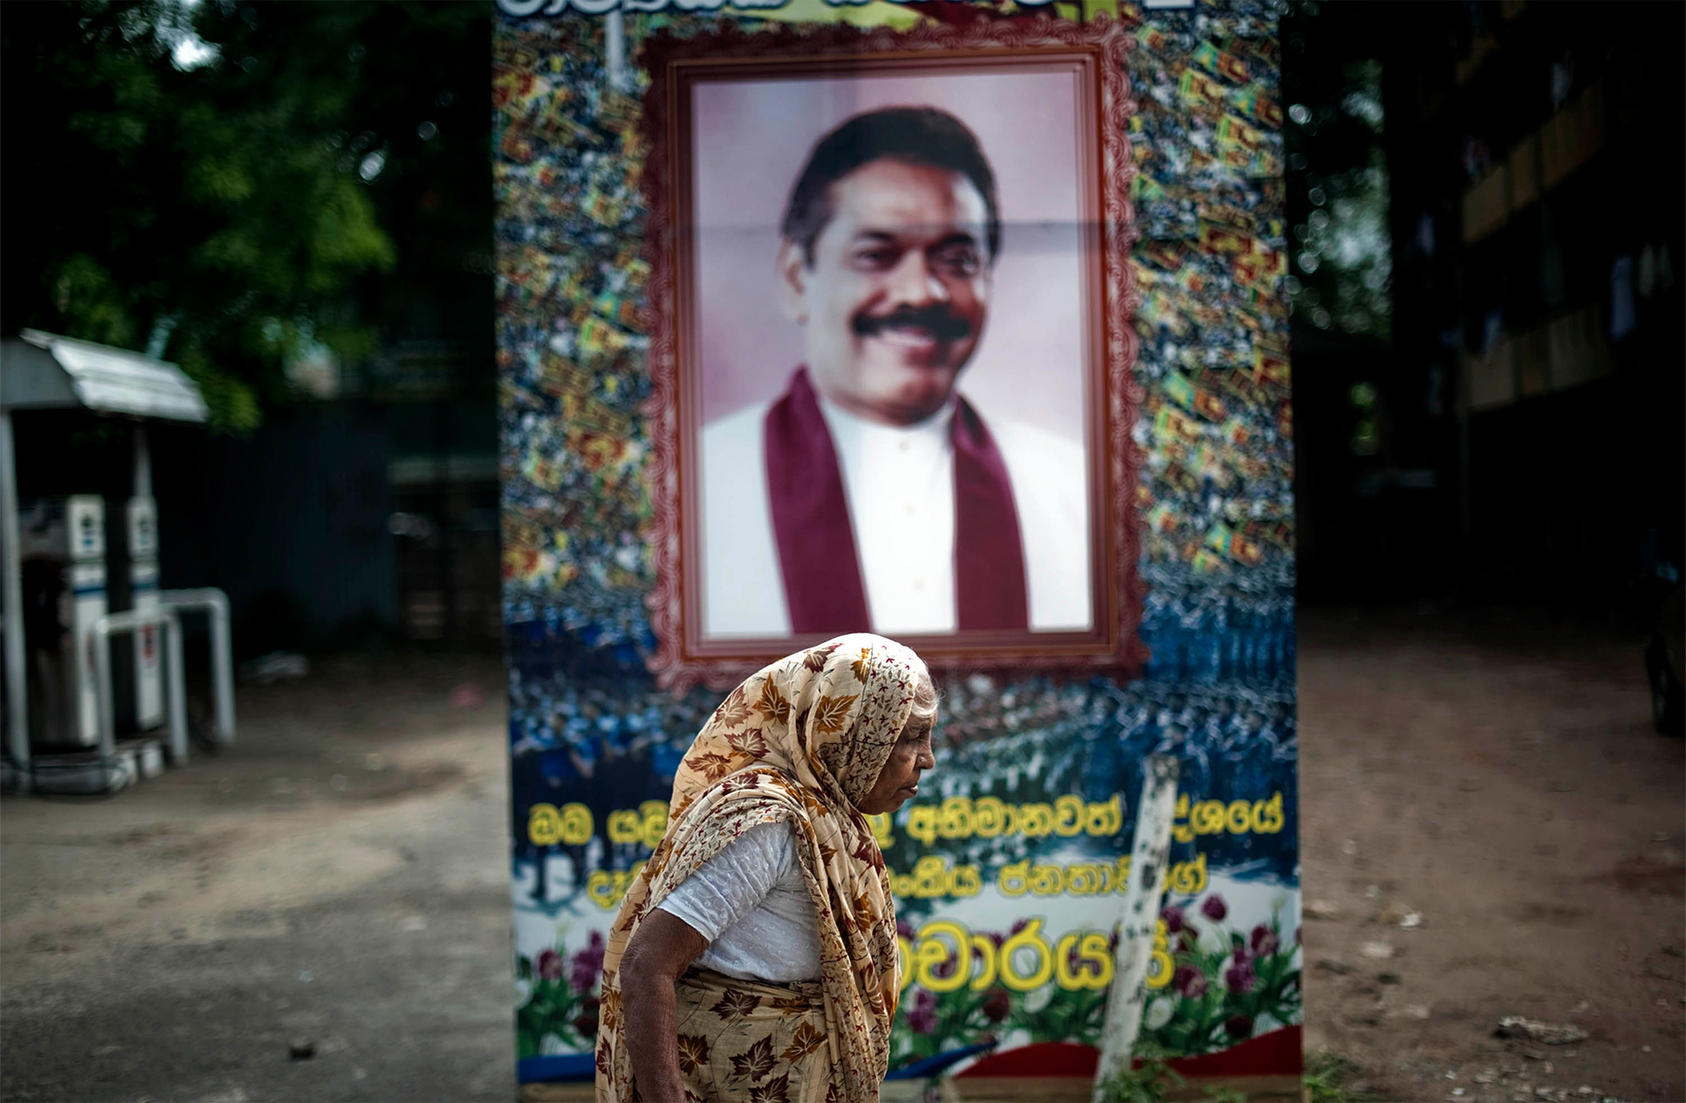 A woman walks past a poster celebrating former President and current Prime Minister Mahinda Rajapaksa in Colombo, Sri Lanka. July 4, 2009. (Keith Bedford/The New York Times)